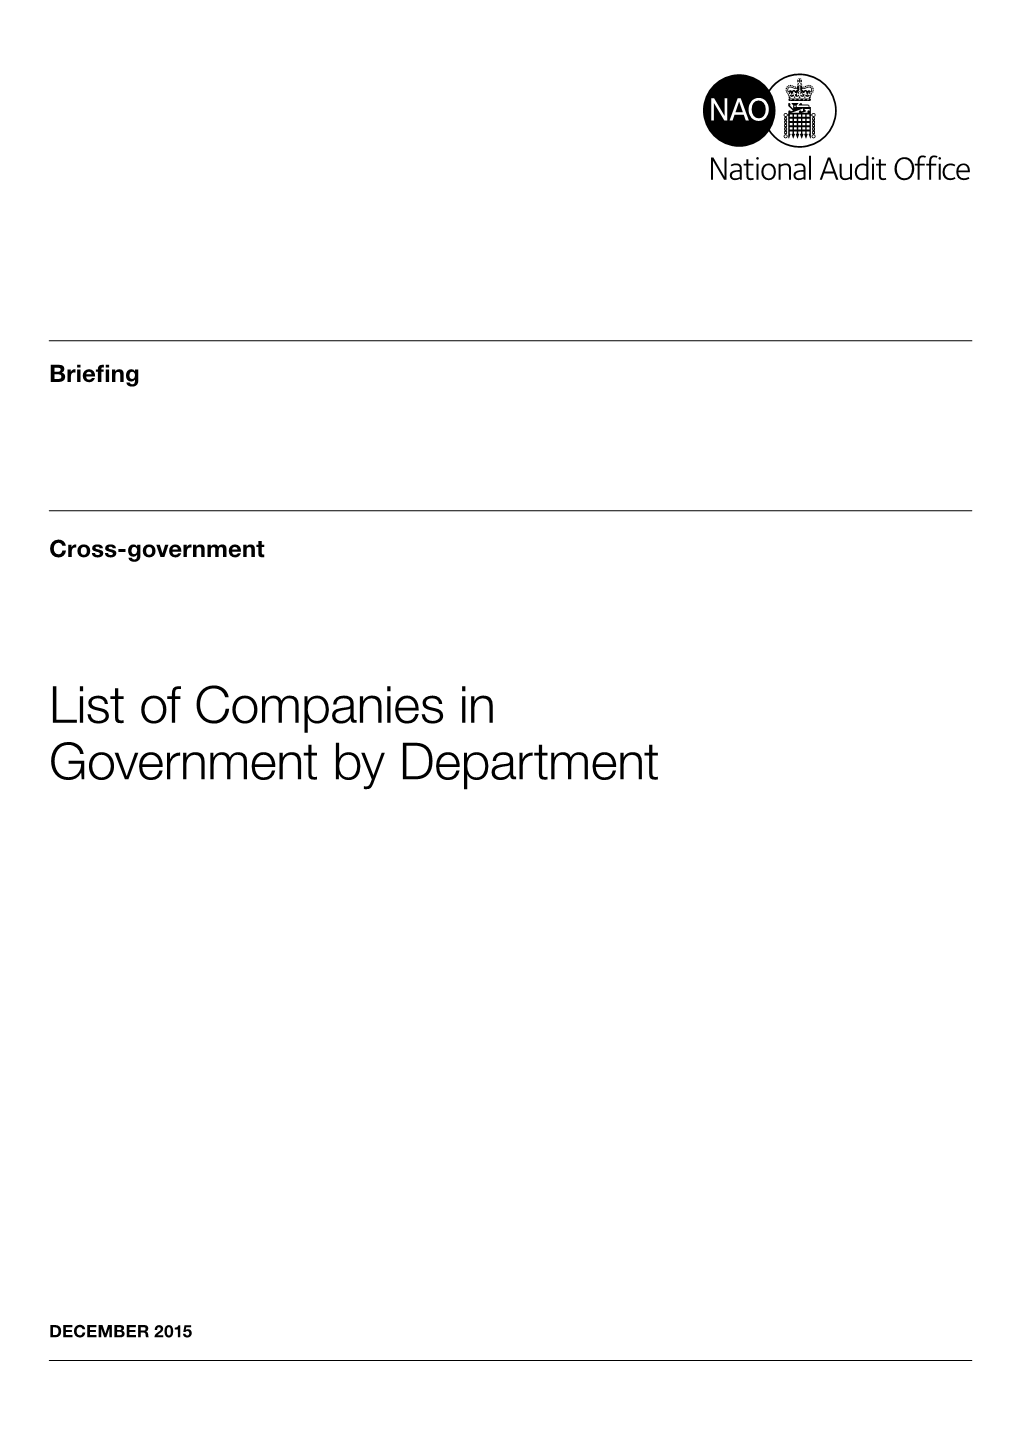 List of Companies in Government by Department